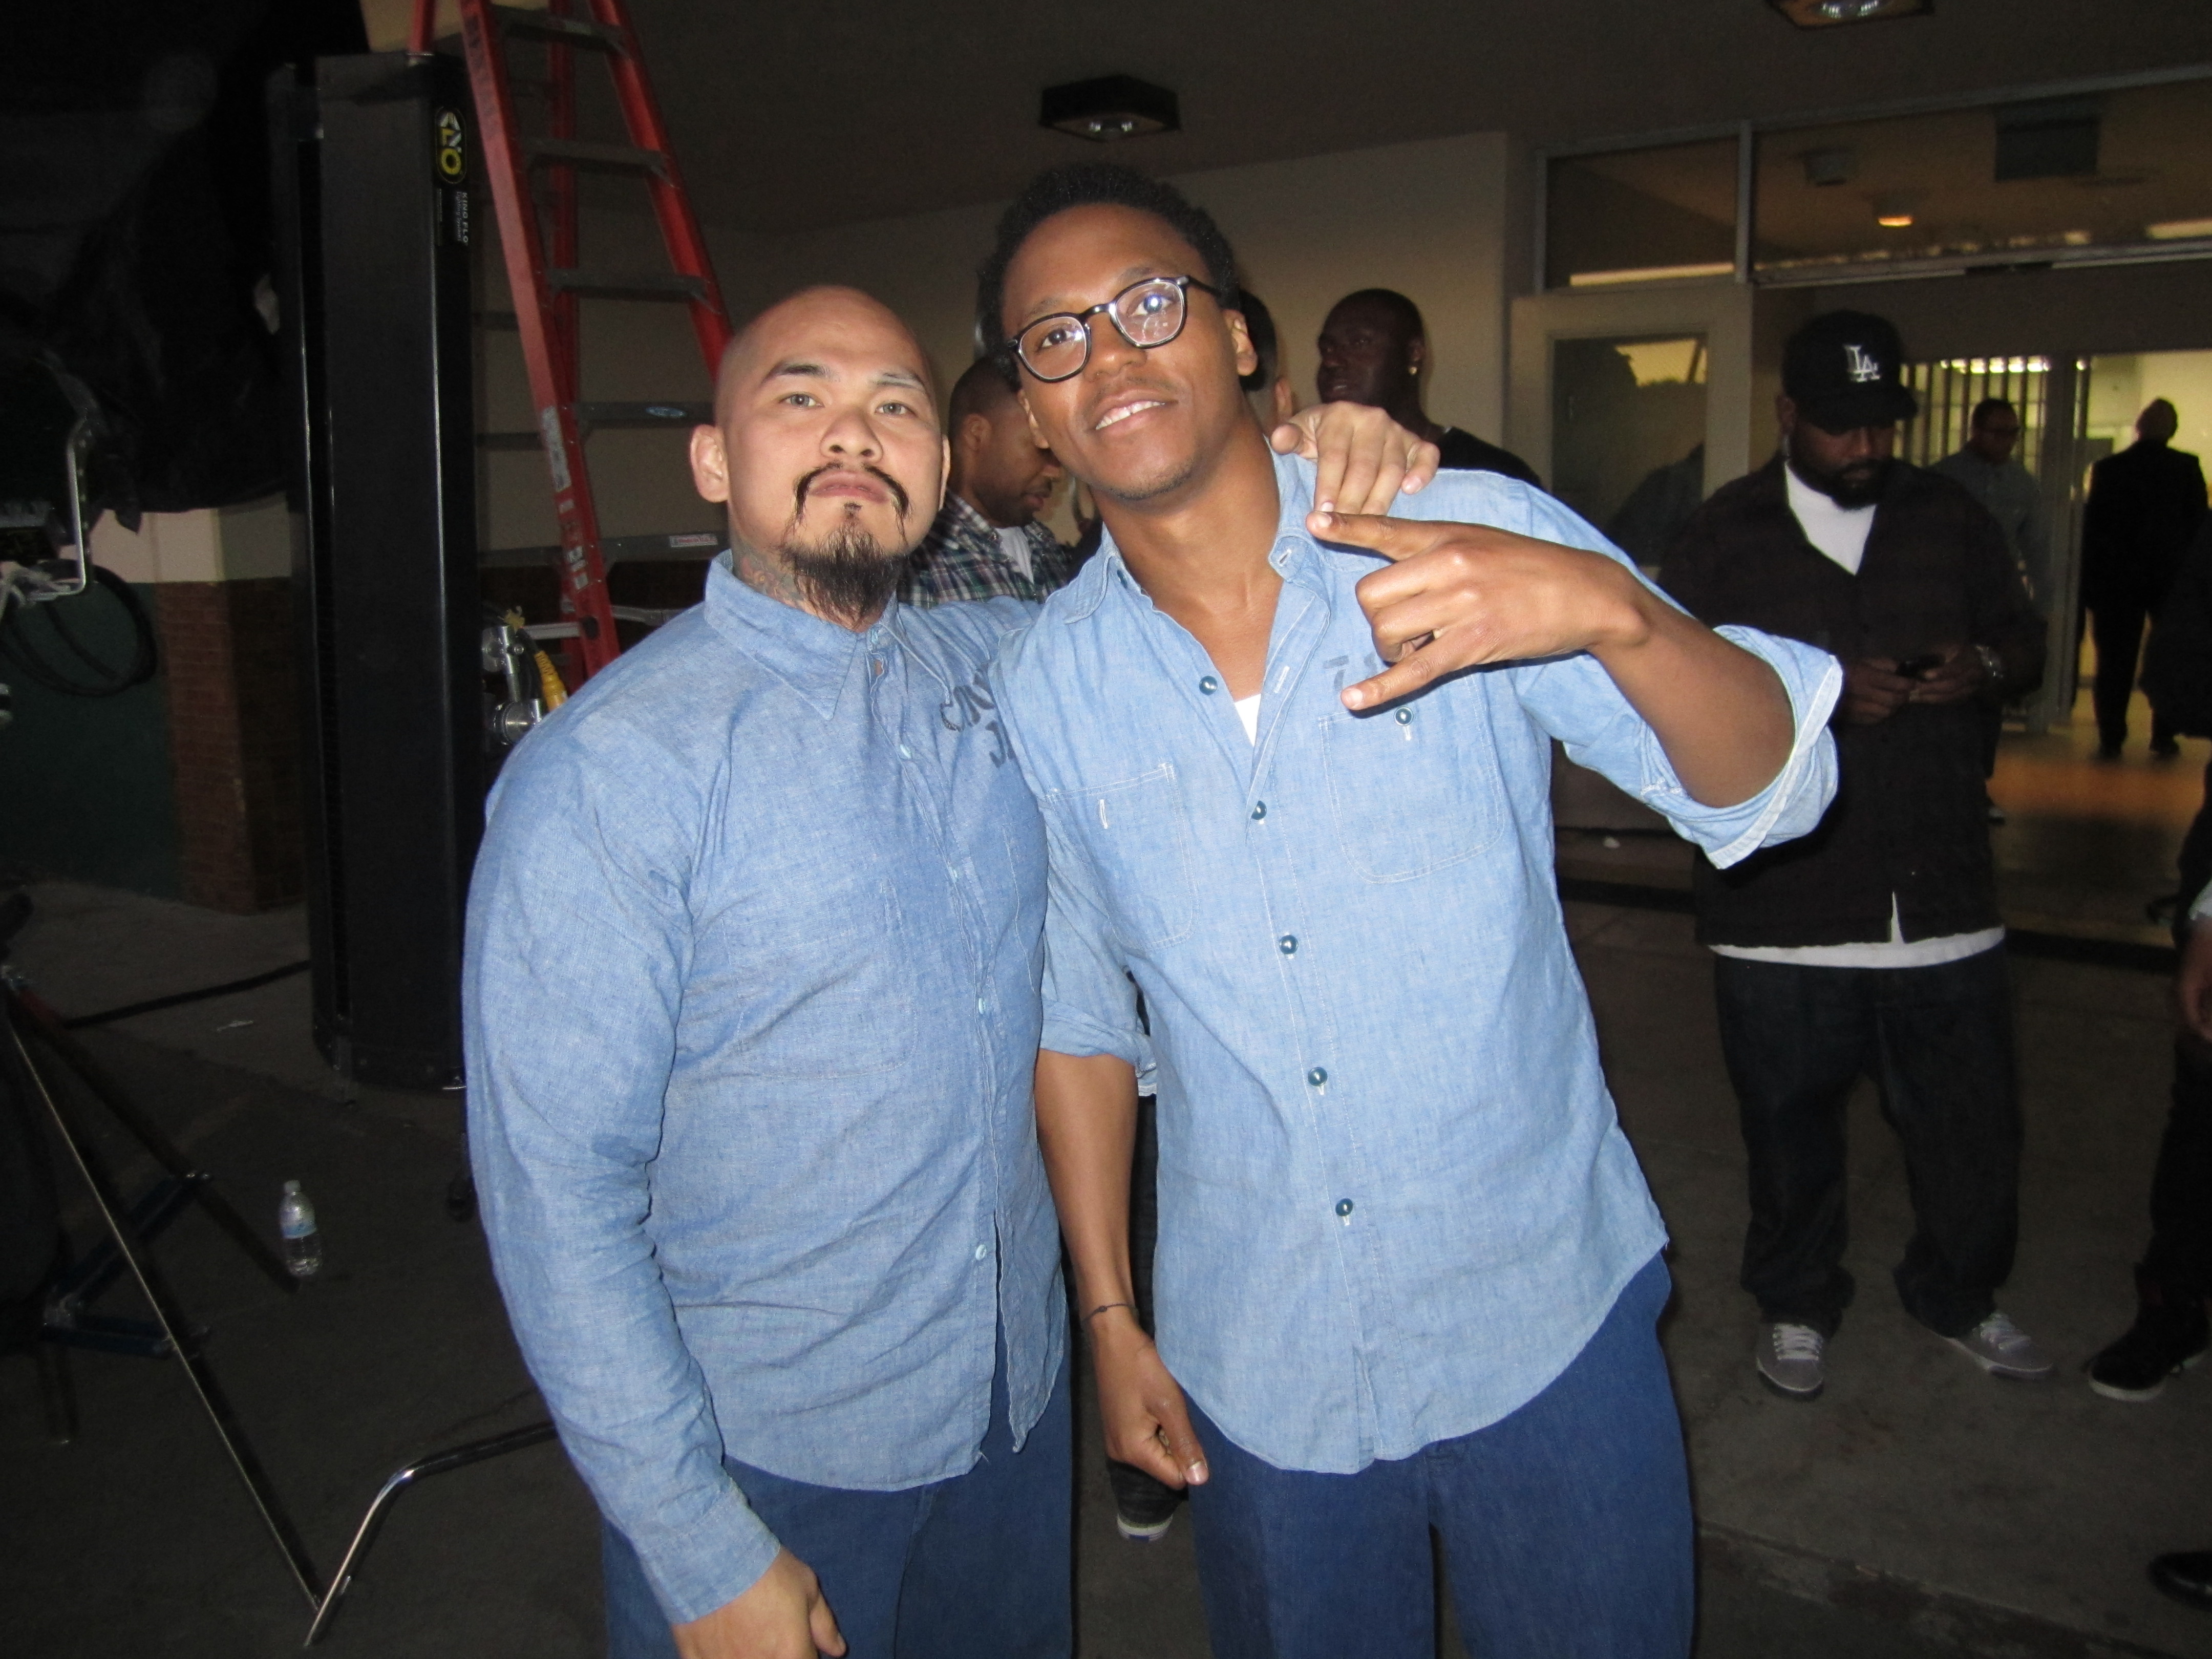 On set with Lupe Fiasco.